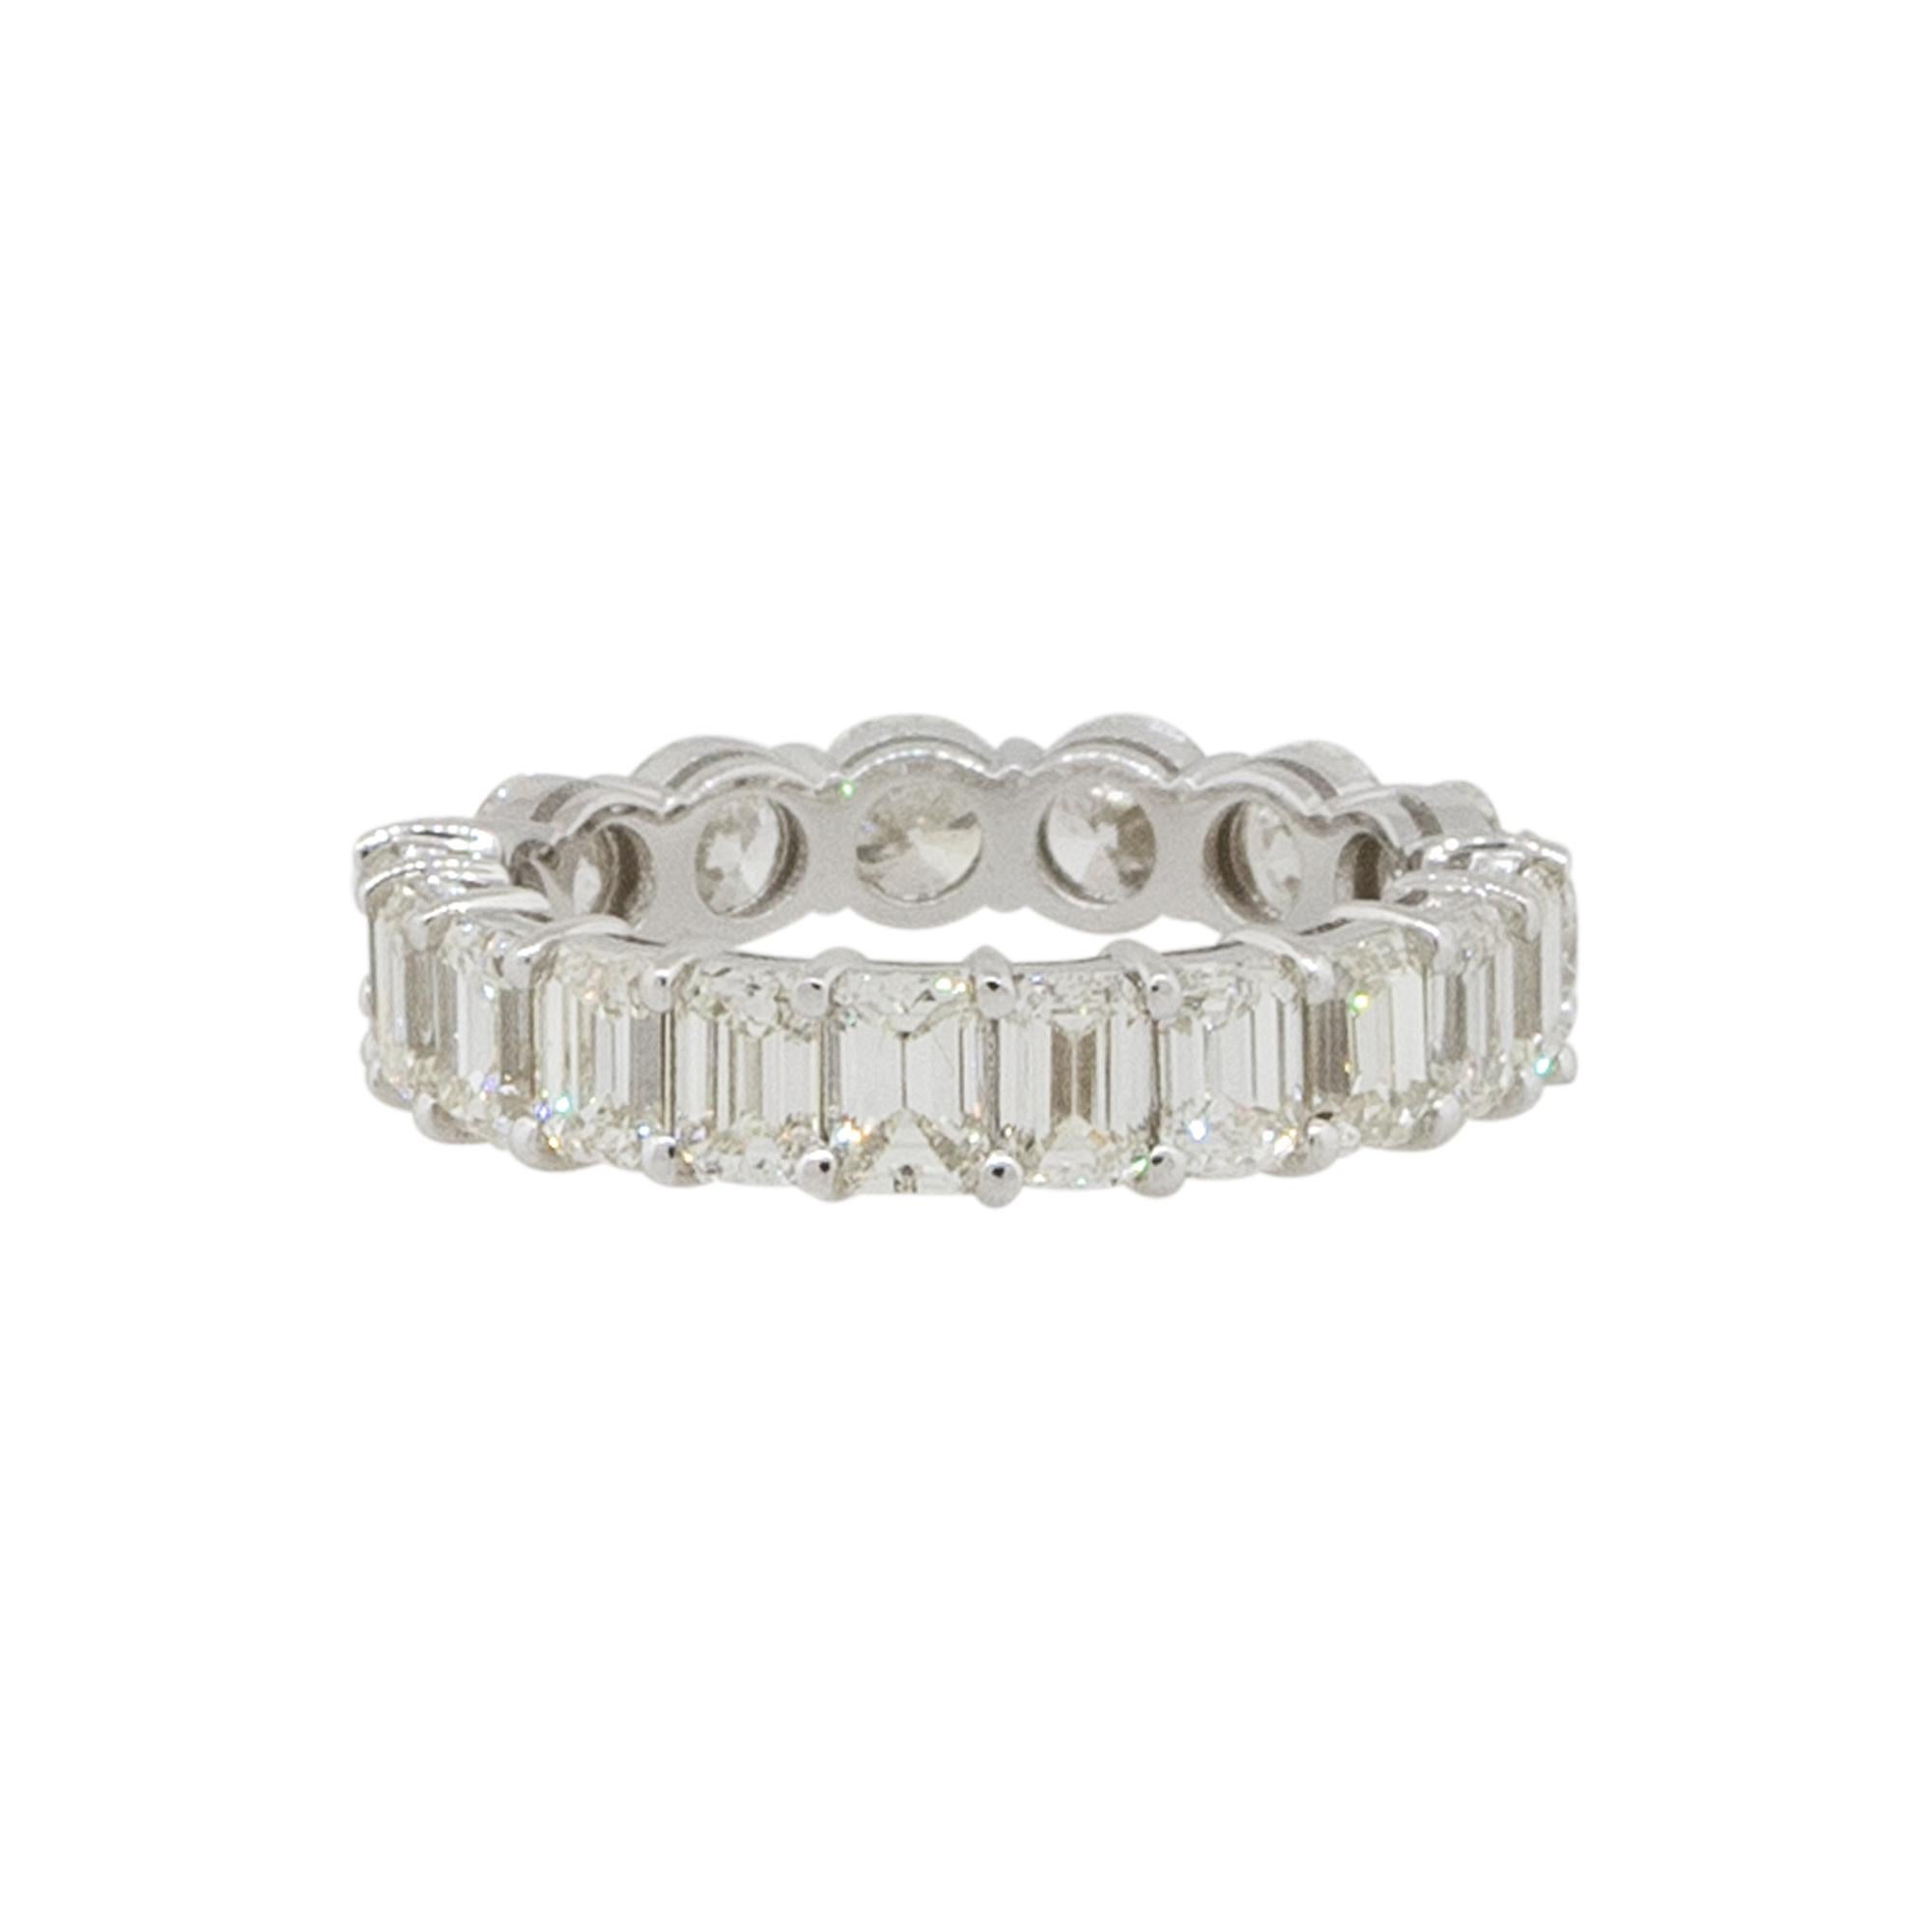 4.61 Carat Round and Emerald Cut Diamond Eternity Band Ring 14 Karat In Stock In Excellent Condition For Sale In Boca Raton, FL